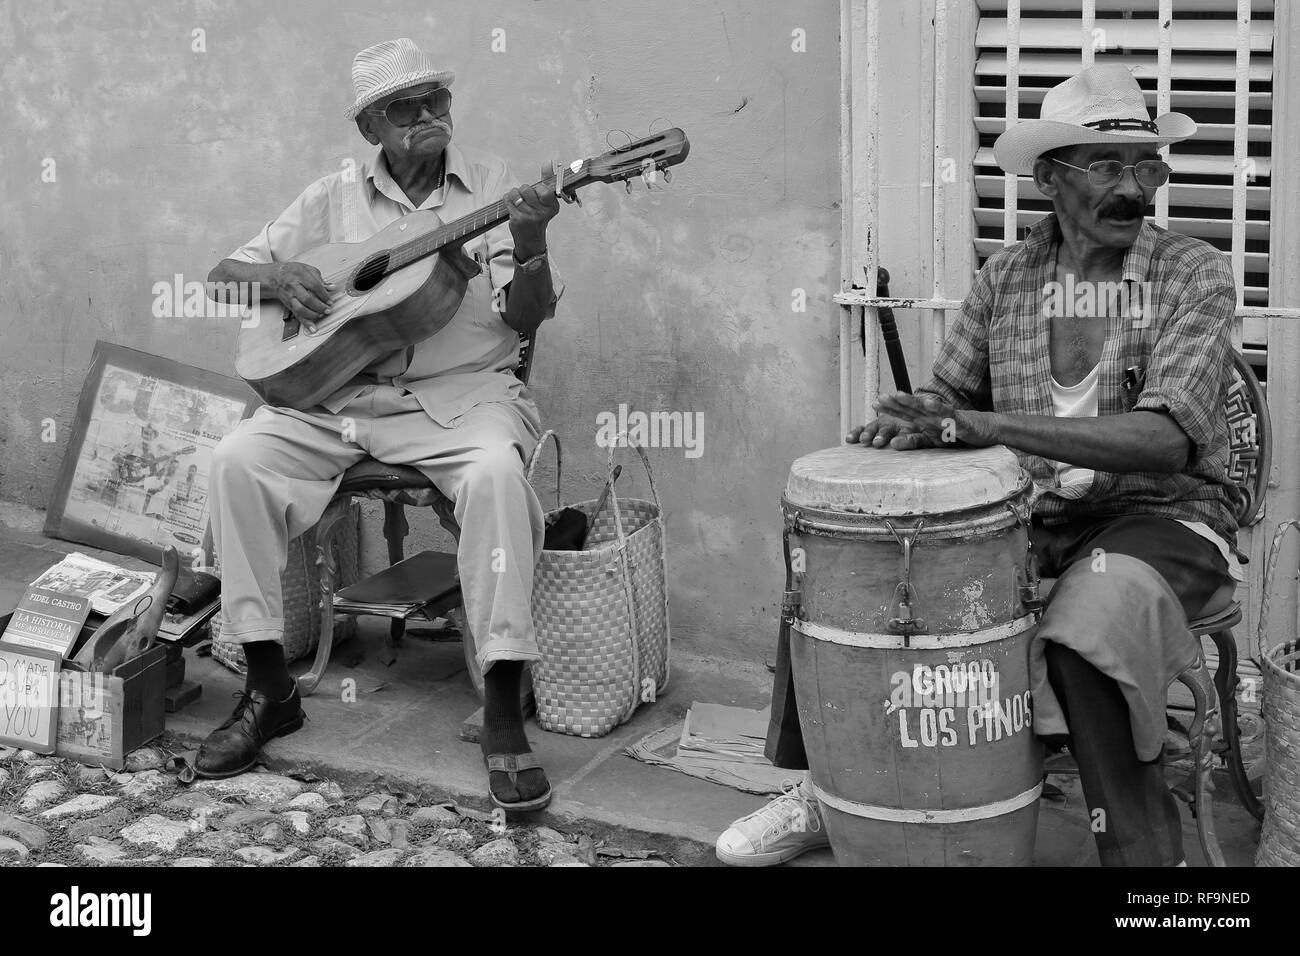 Havana, Cuba - Music and music albums in Havana and almost all cities, music groups on the streets. Tourists are happy and have fun with dancing. Stock Photo